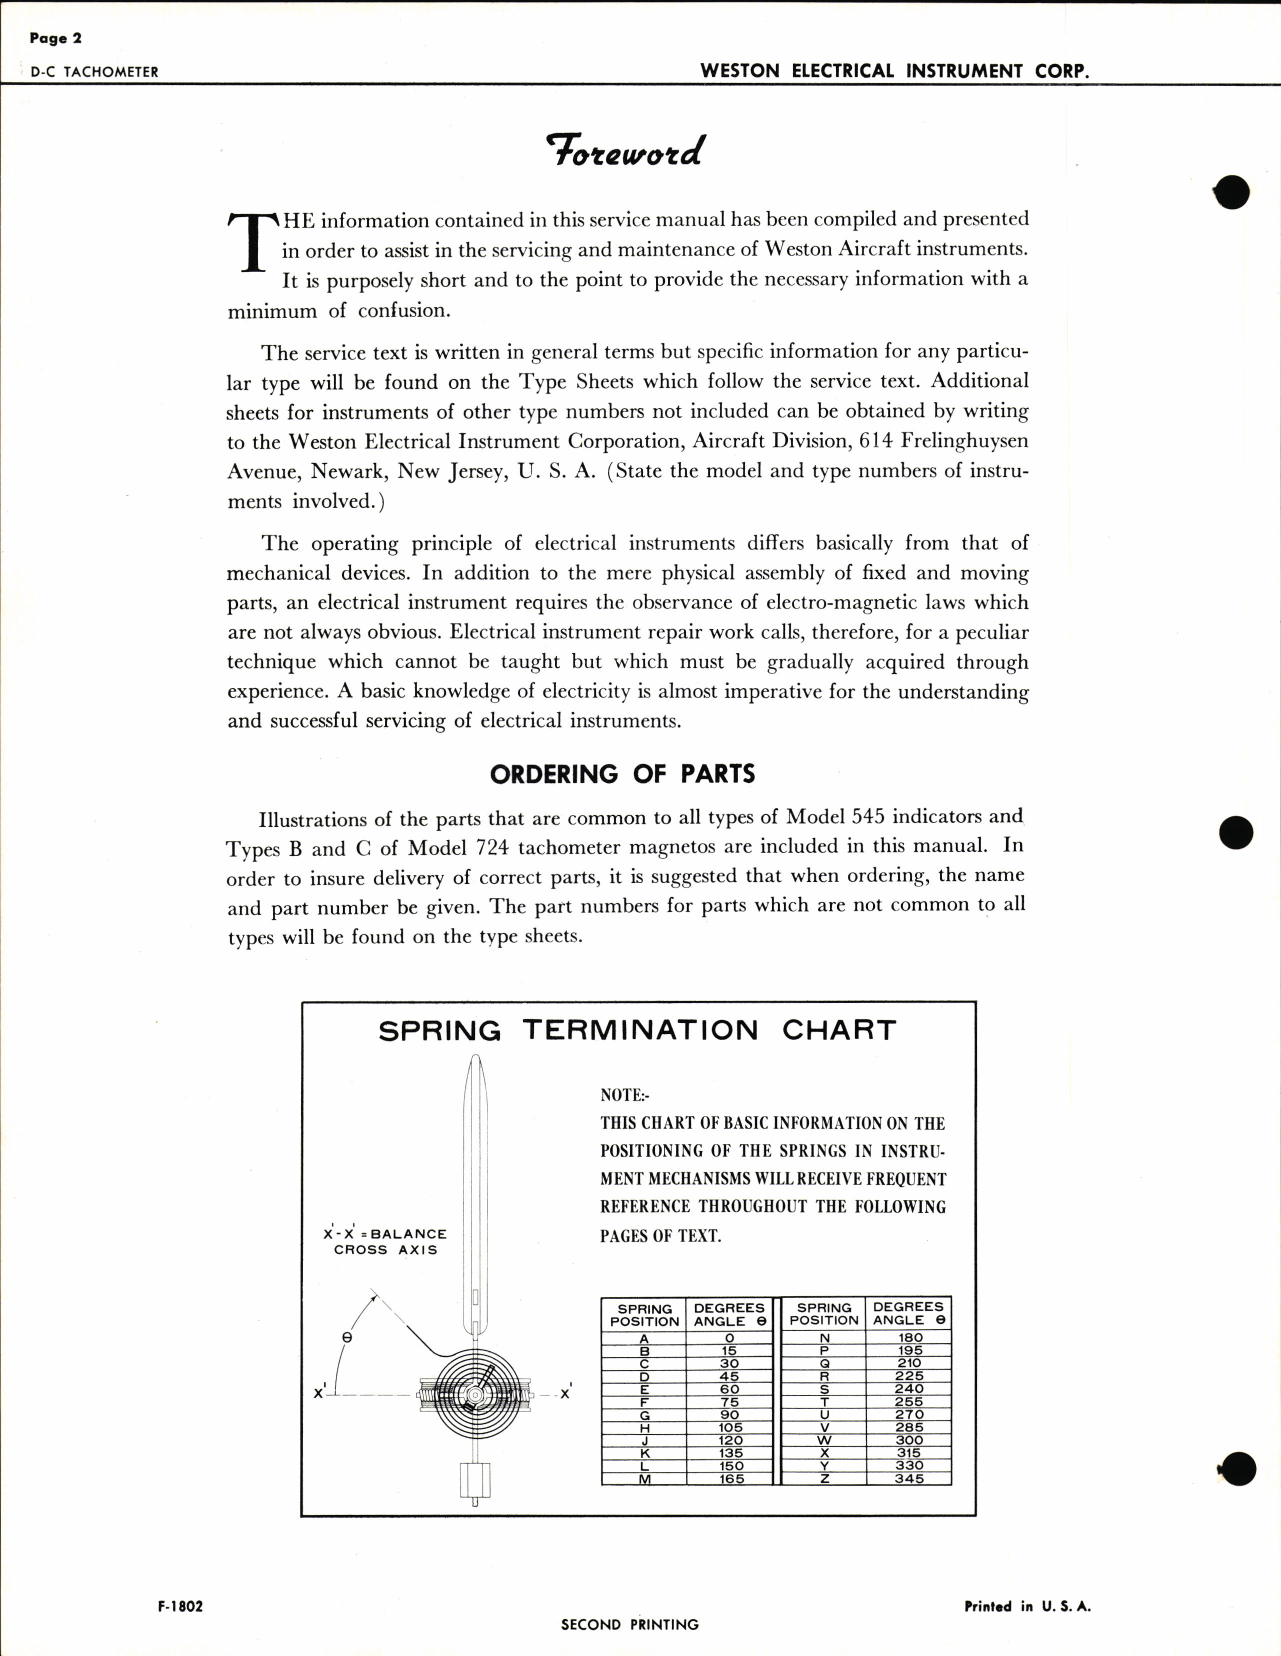 Sample page 2 from AirCorps Library document: Service Instructions for D-C Tachometer 724 Mag & 545 Indicator